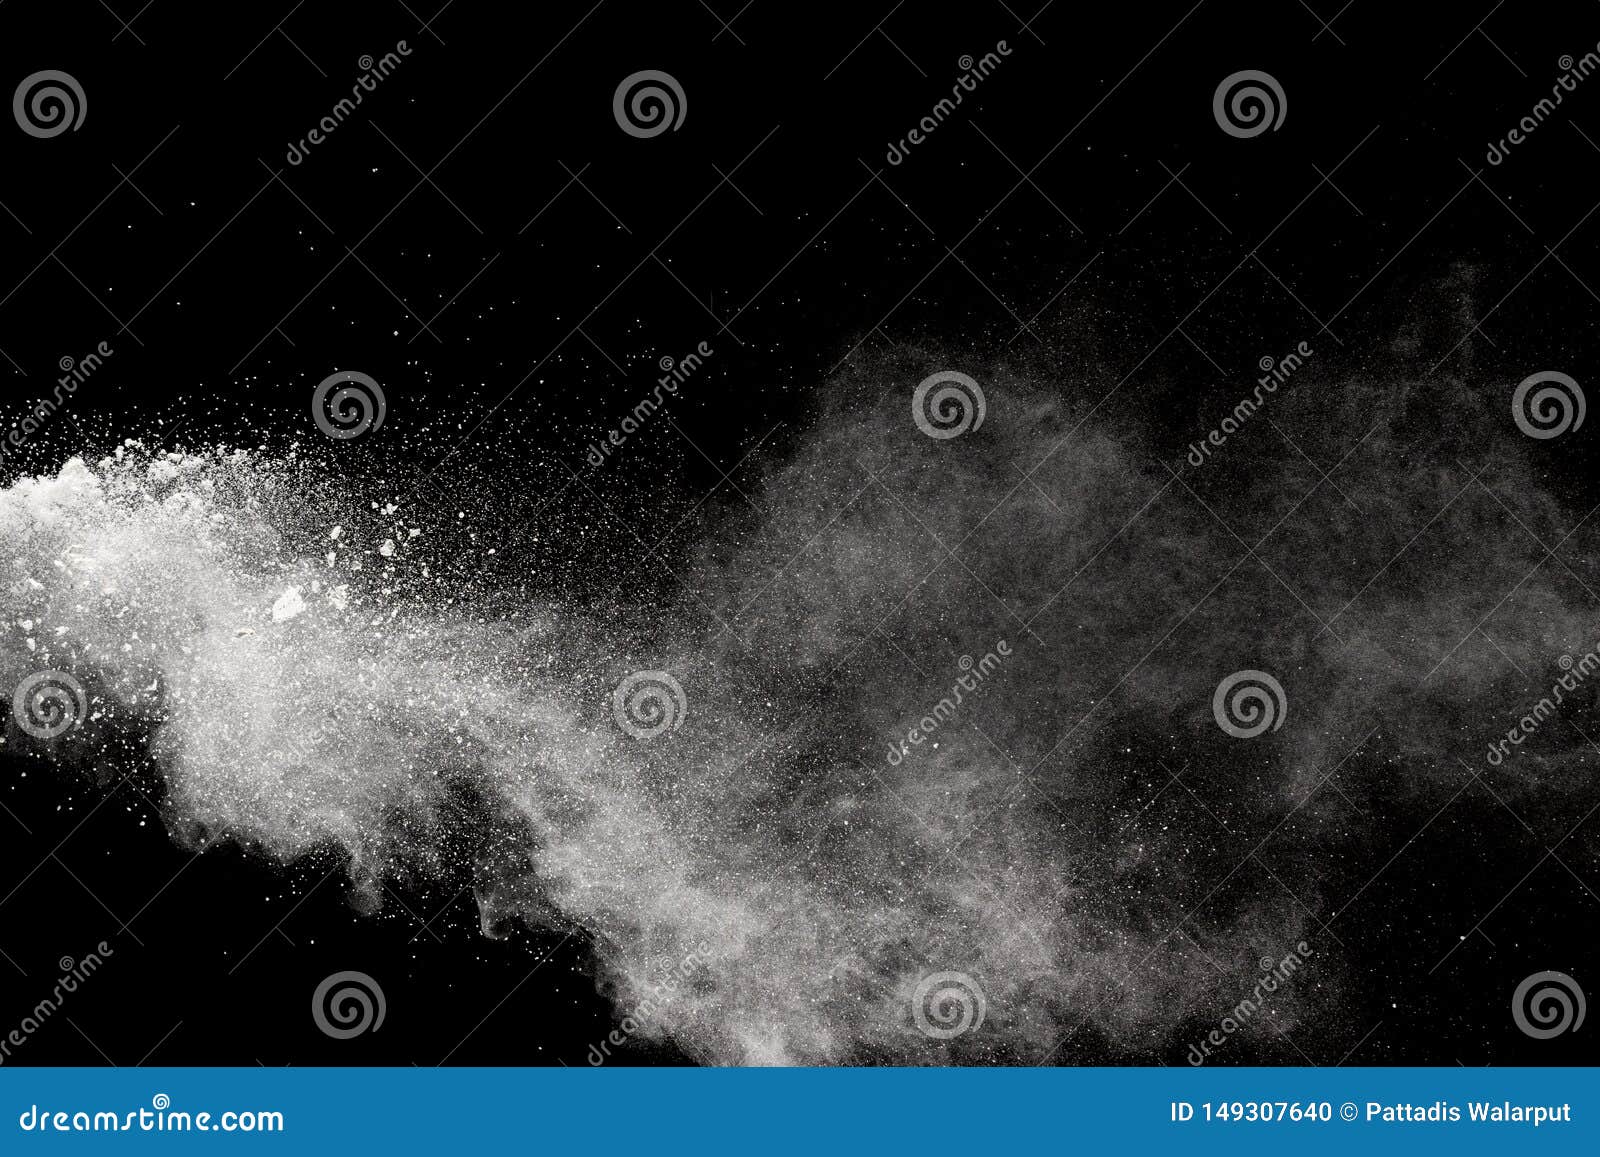 White Powder Explosionfreeze Motion Of White Dust Particles On Black